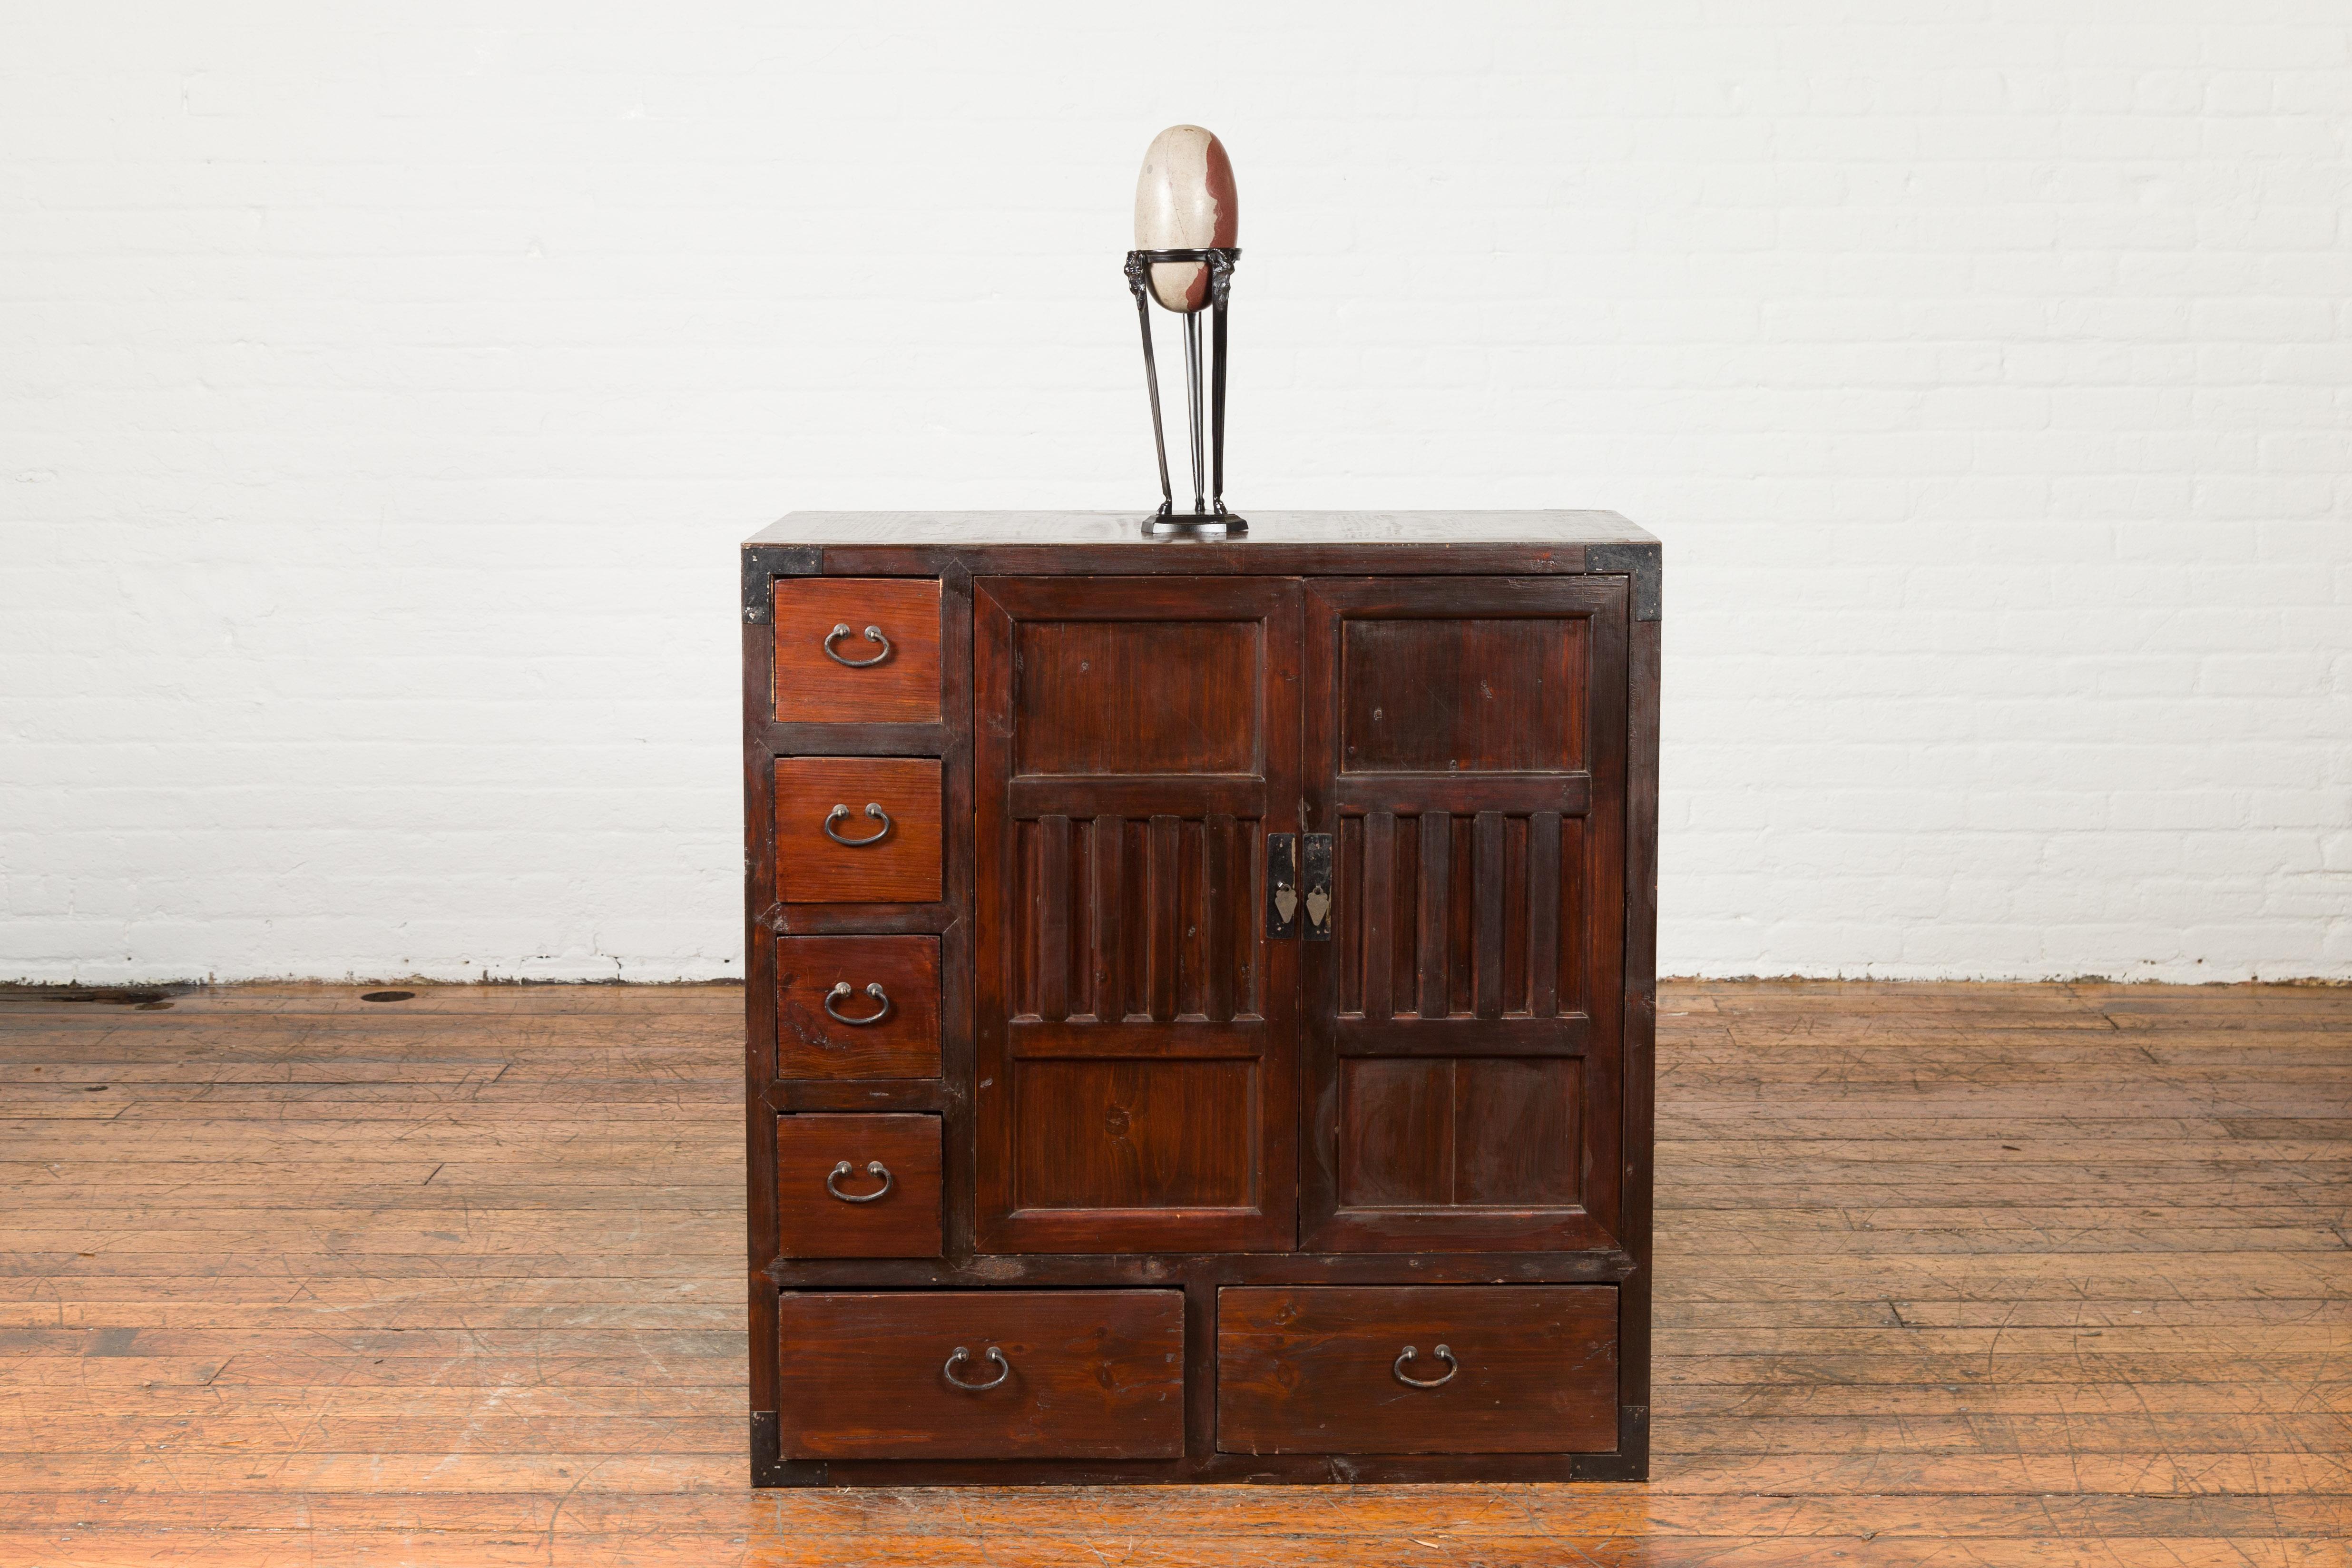 A Japanese antique two-way floating side cabinet from the early 20th century, with two doors and drawers. Created in Japan during the early years of the 20th century, this two-way floating cabinet features a rectangular top sitting above a pair of